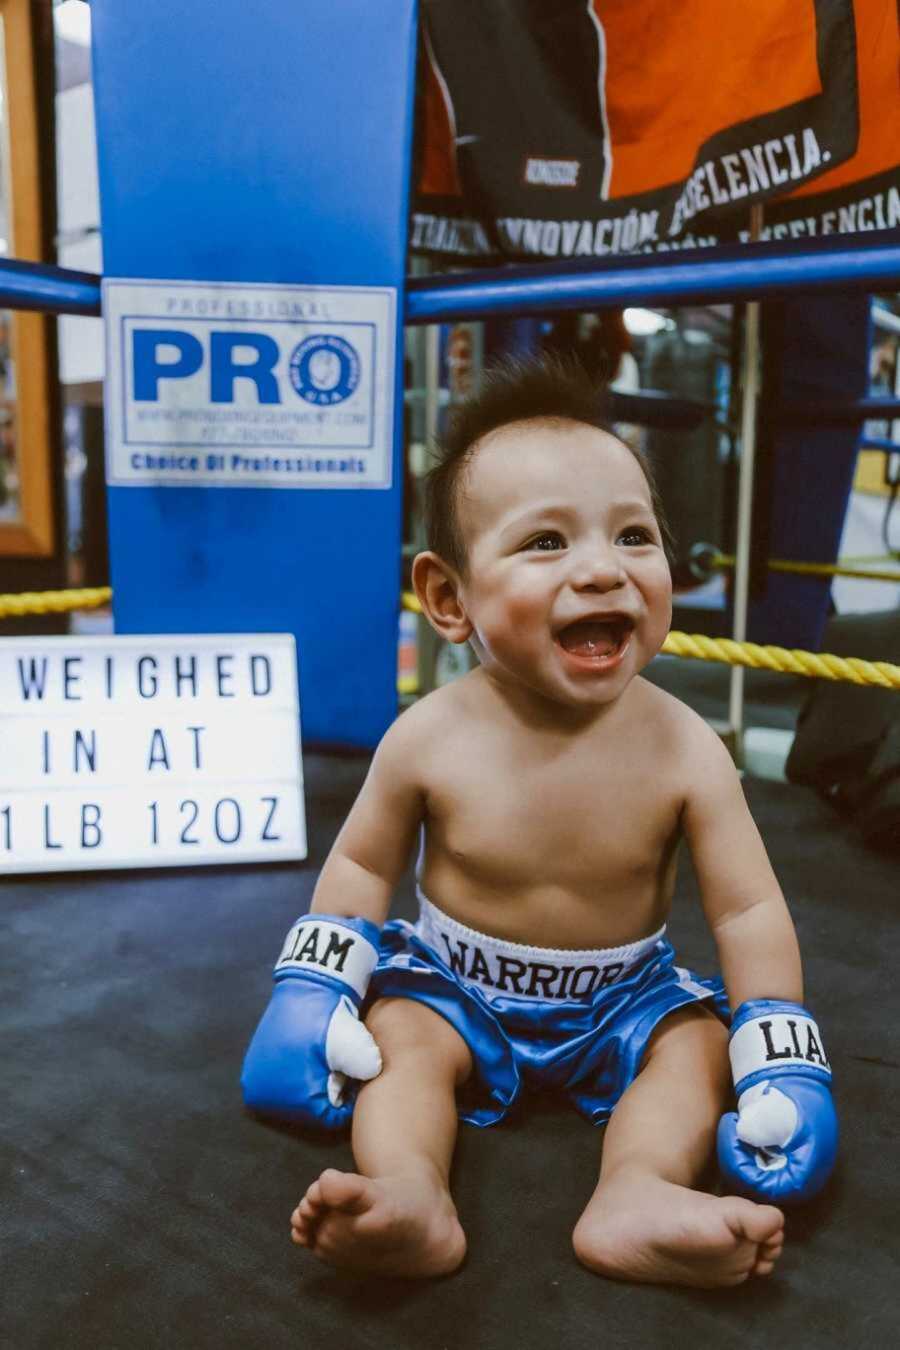 Smiling infant wearing blue boxing gloves and shorts